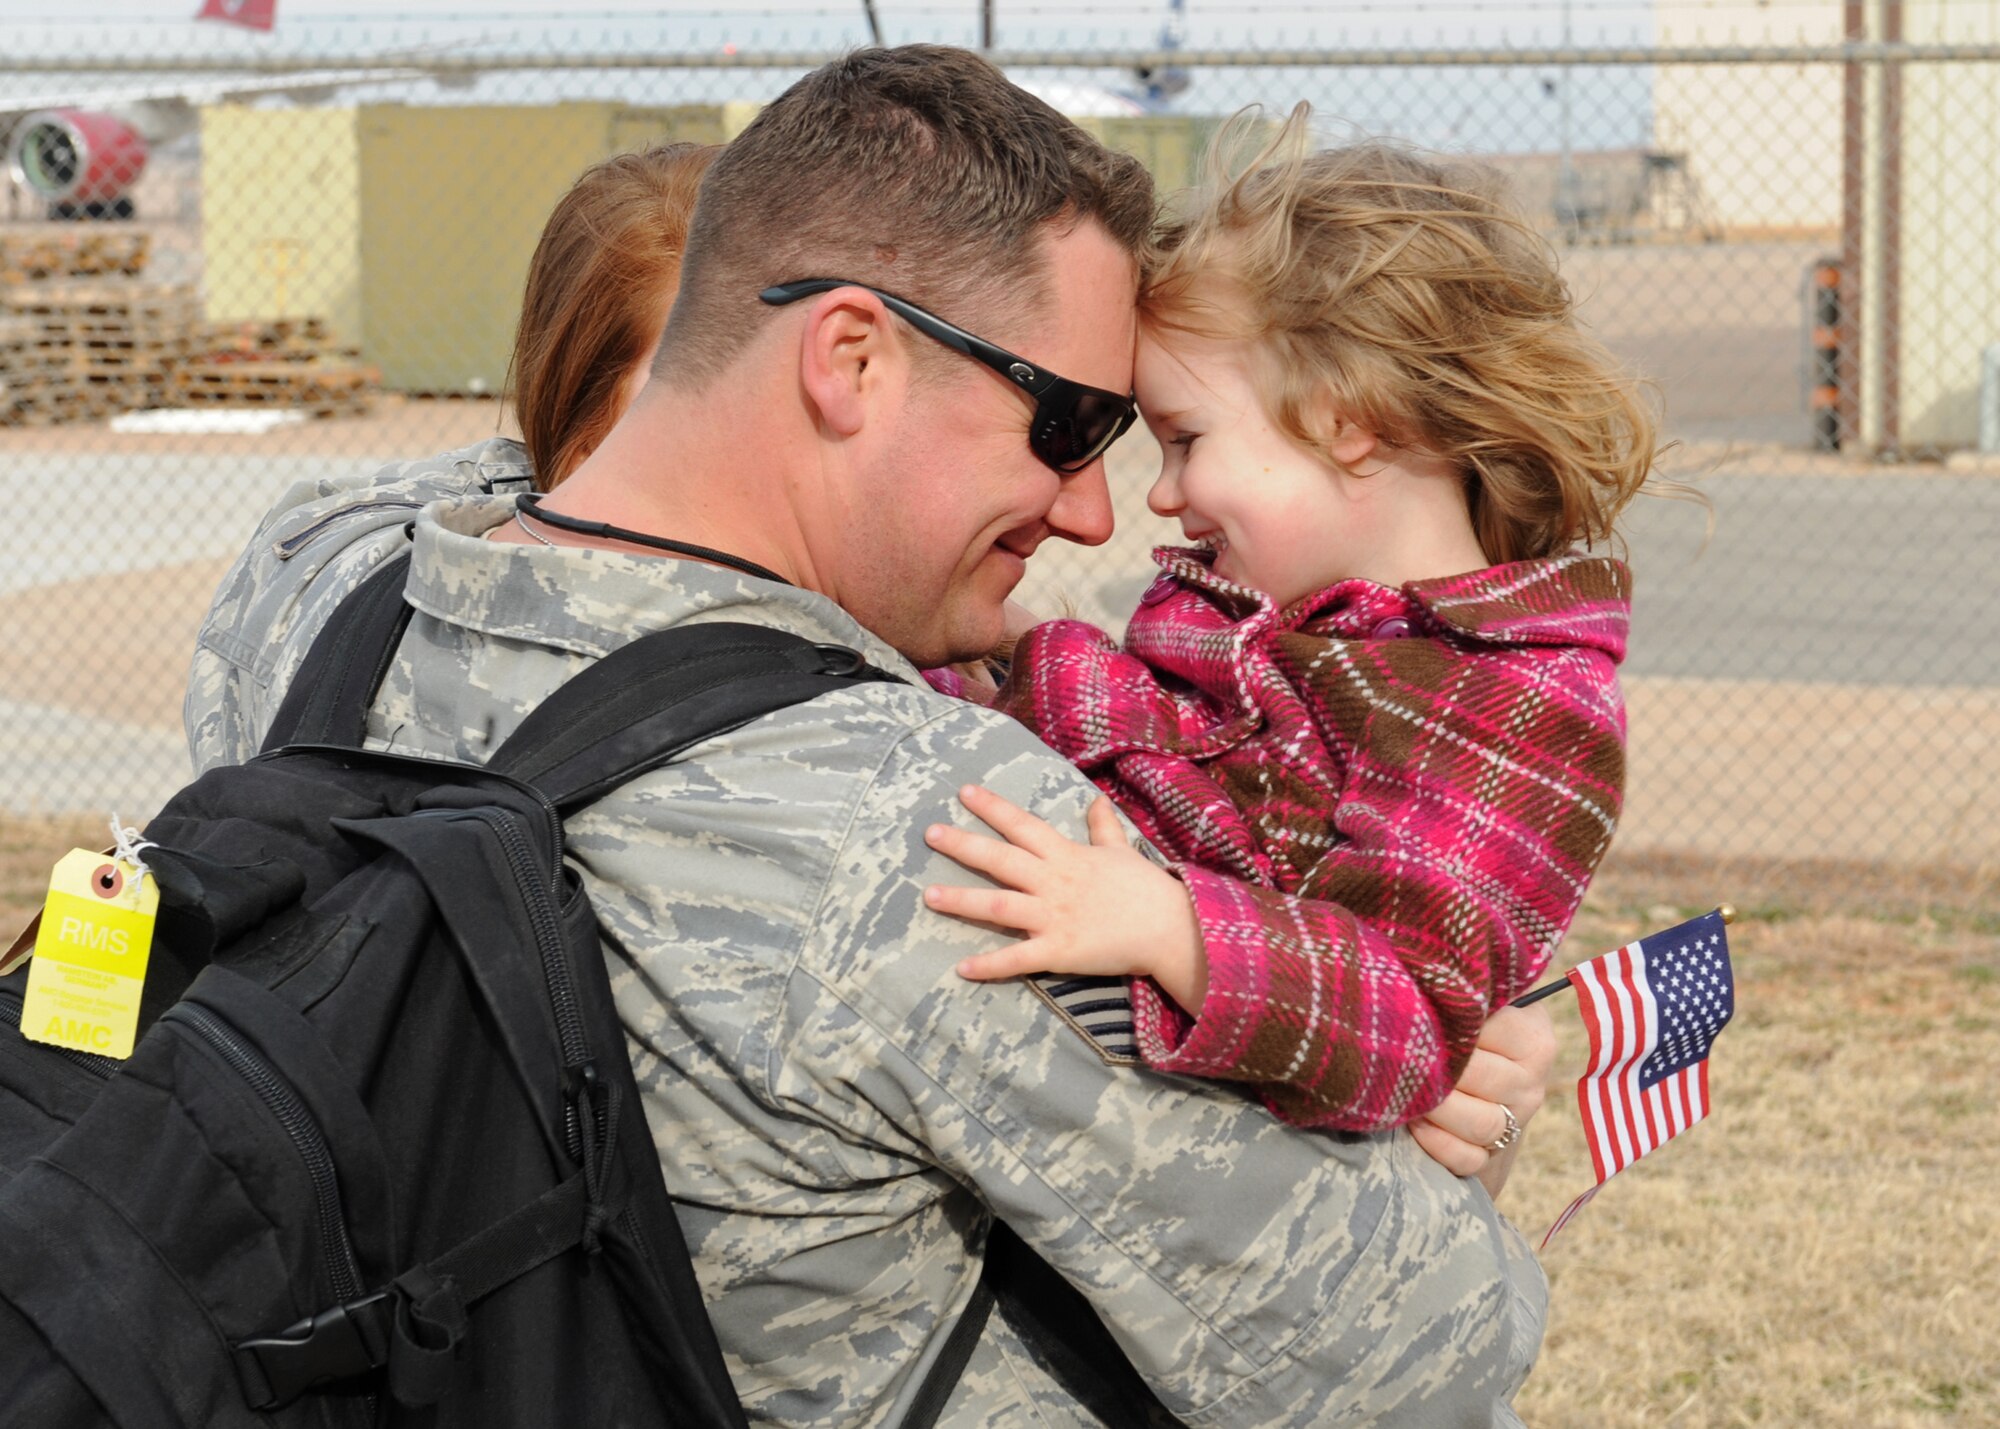 Tech. Sgt. Sean Fletcher, 7th Equipment Maintenance Squadron, hugs his daughter, Jan. 16, 2012, after returning to Dyess Air Force Base, Texas. Fletcher returned from a 4-month deployment to Southwest Asia. (U.S. Air Force photo Airman 1st Class Peter Thompson/Released)